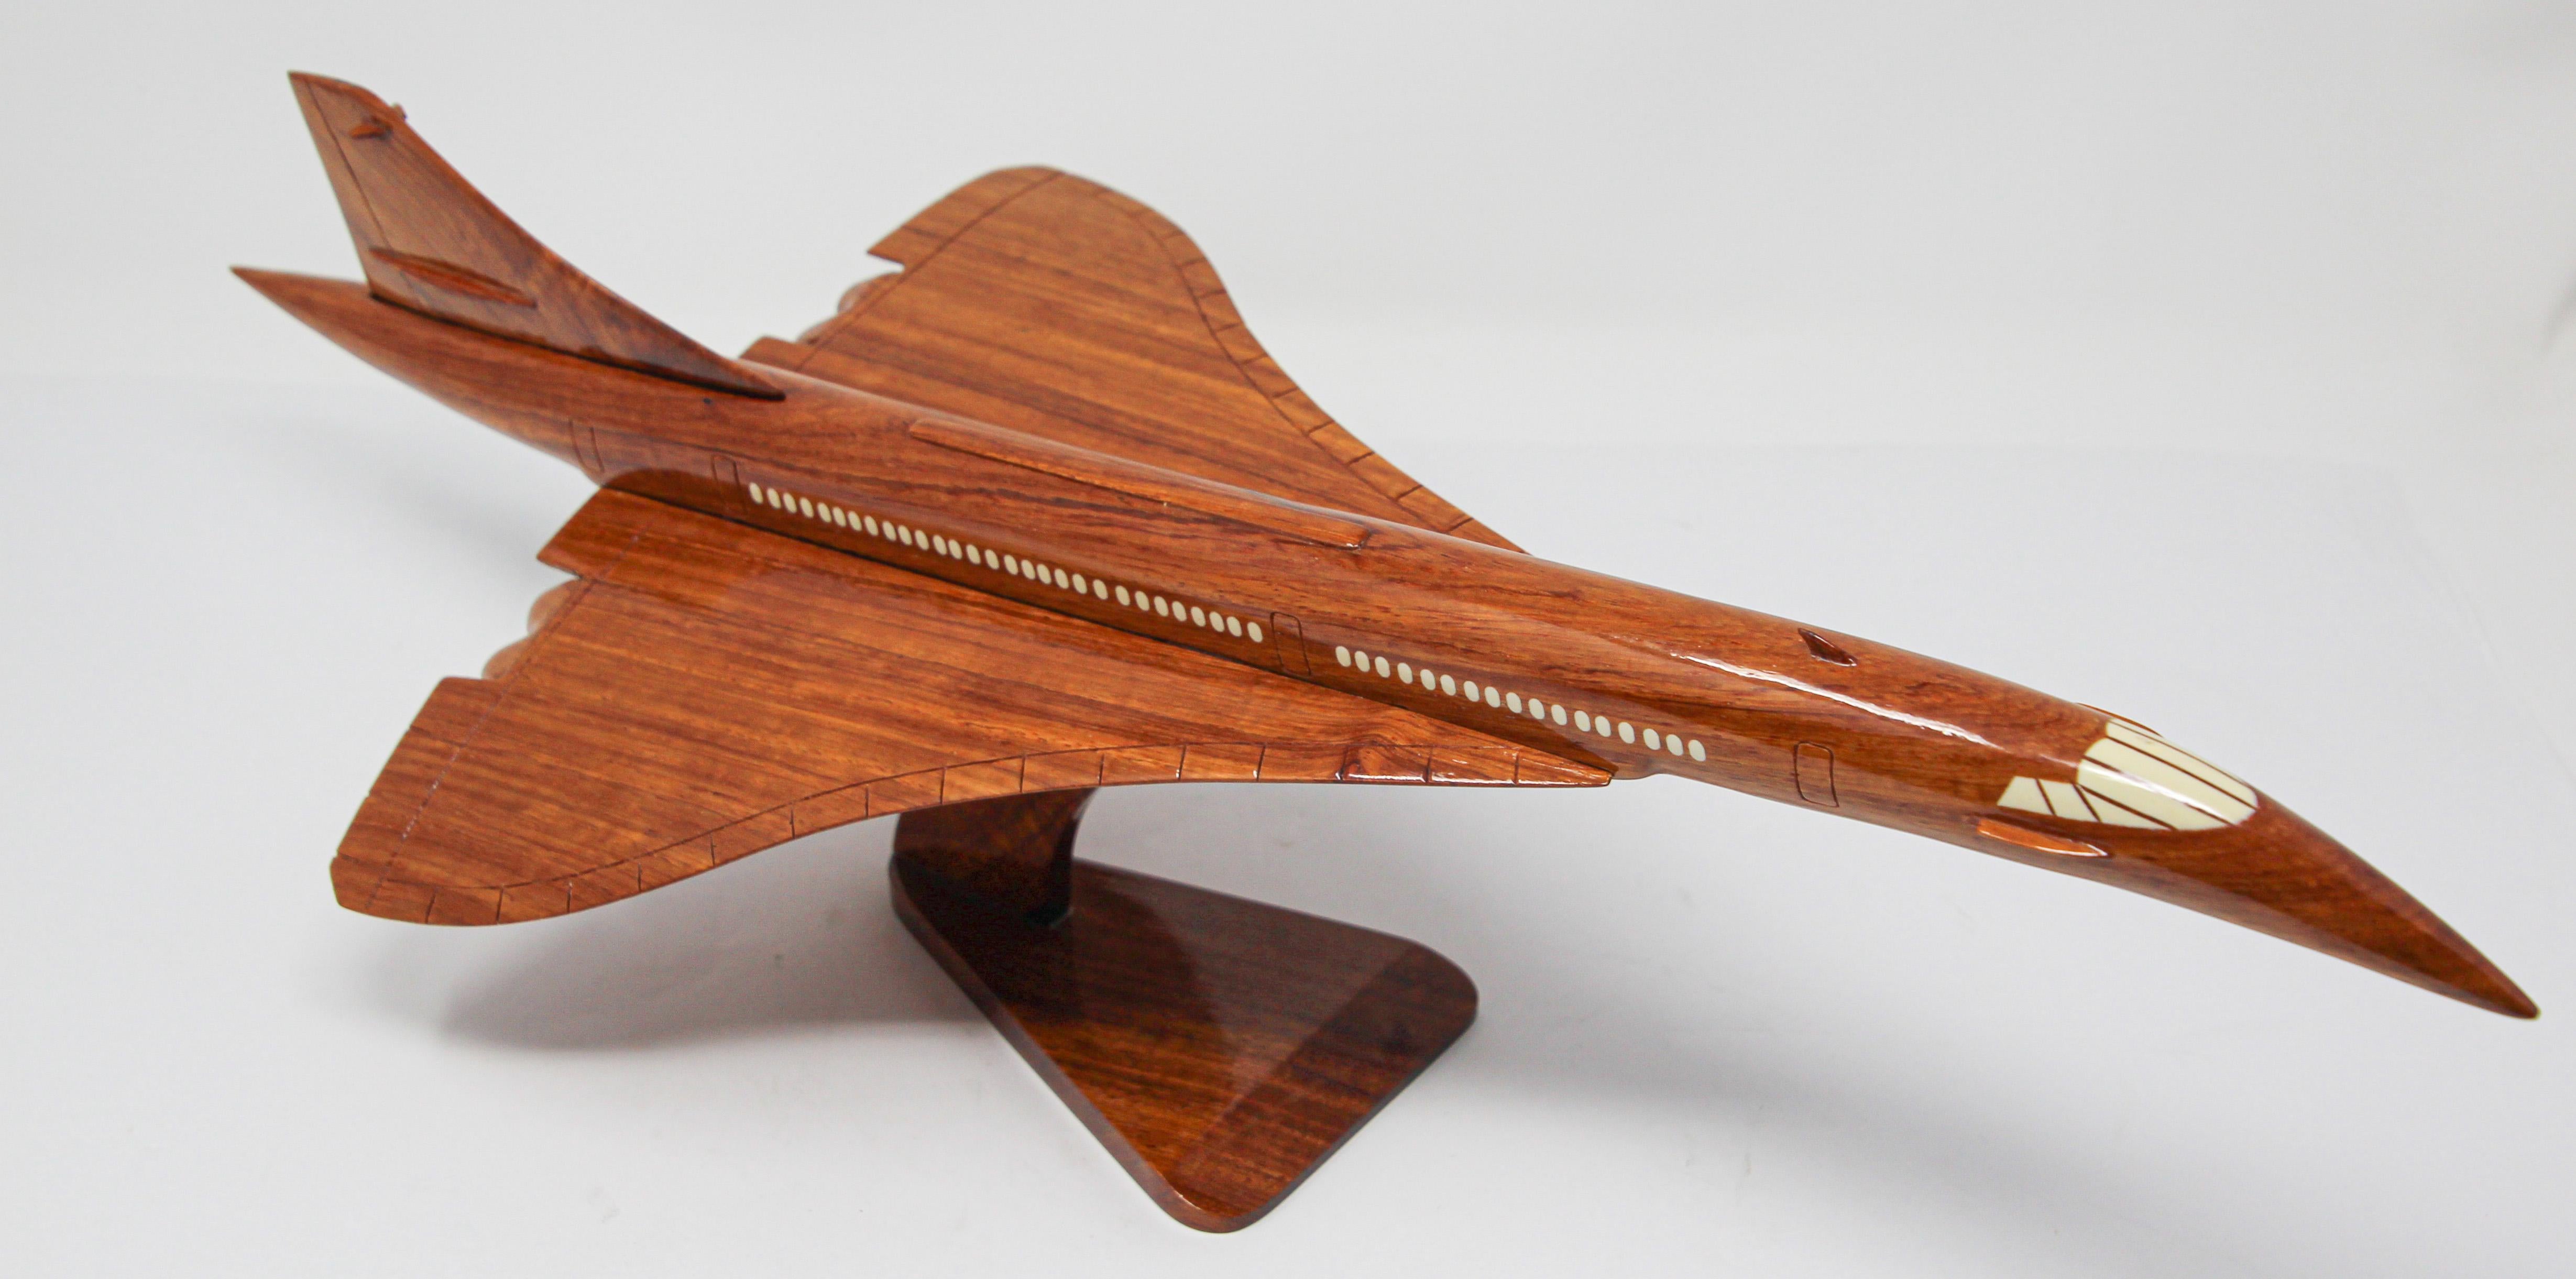 Wood Model of the Concorde Supersonic Aircraft 7